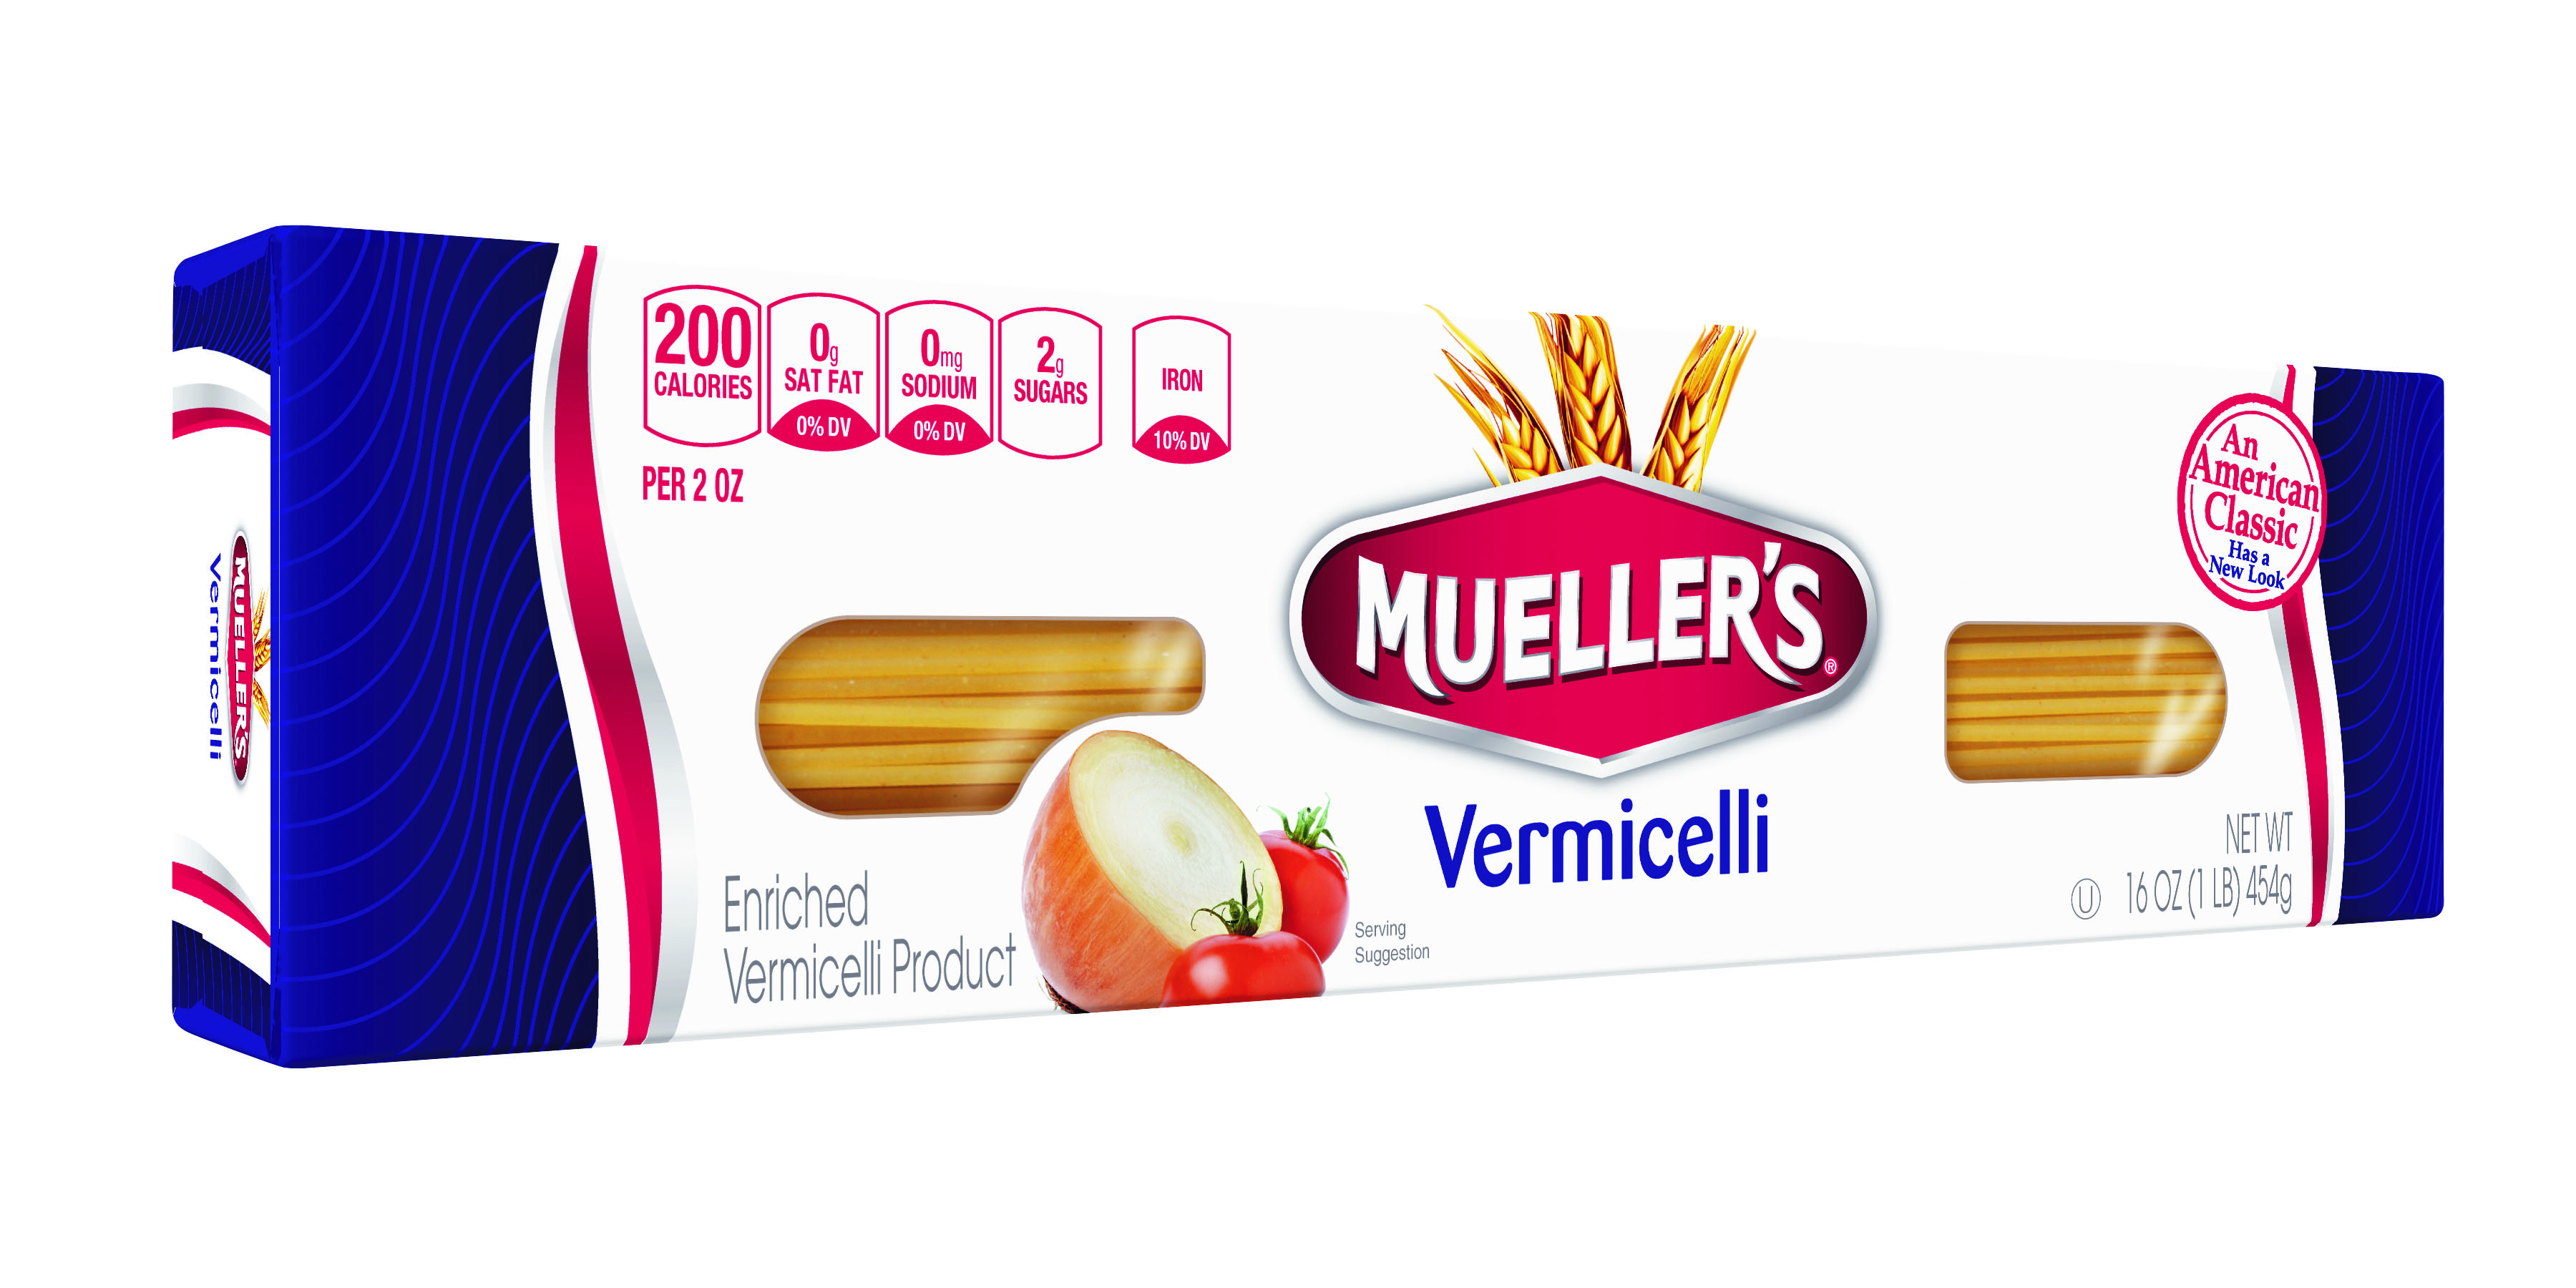 box of vermicelli pasta noodles from muellers